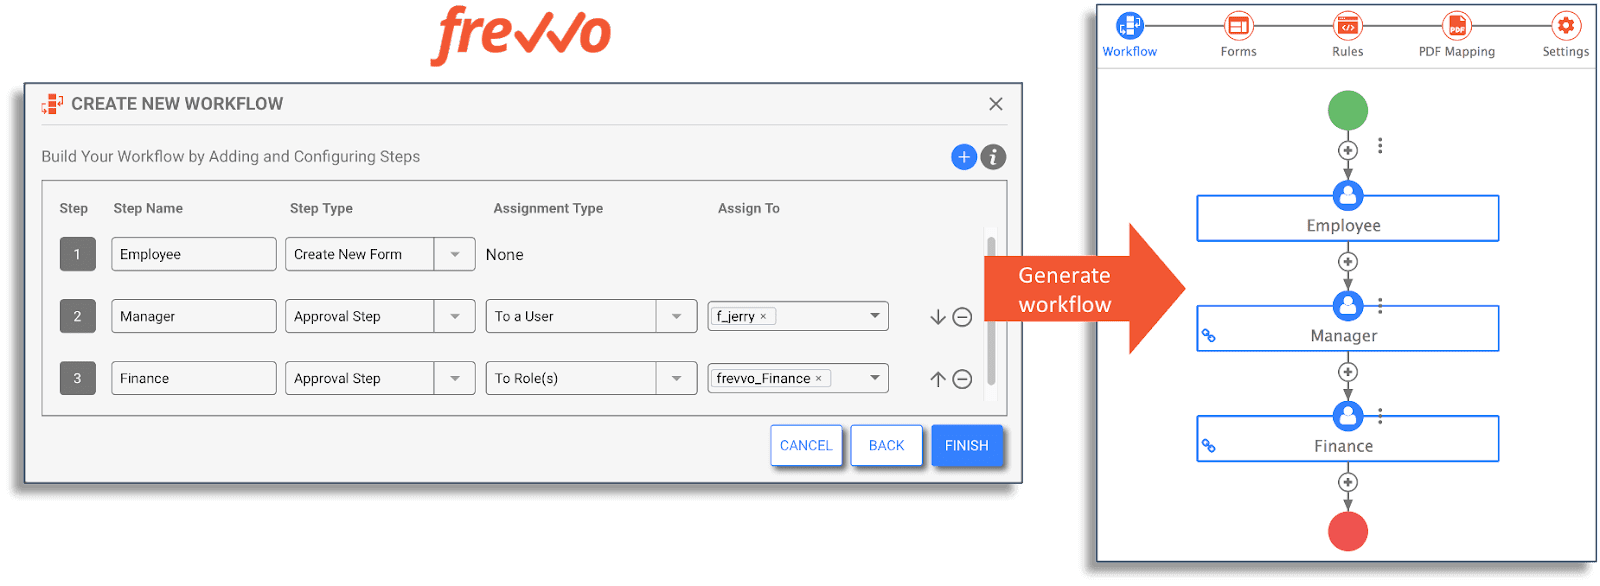 Using frevvo's workflow wizard to create a workflow